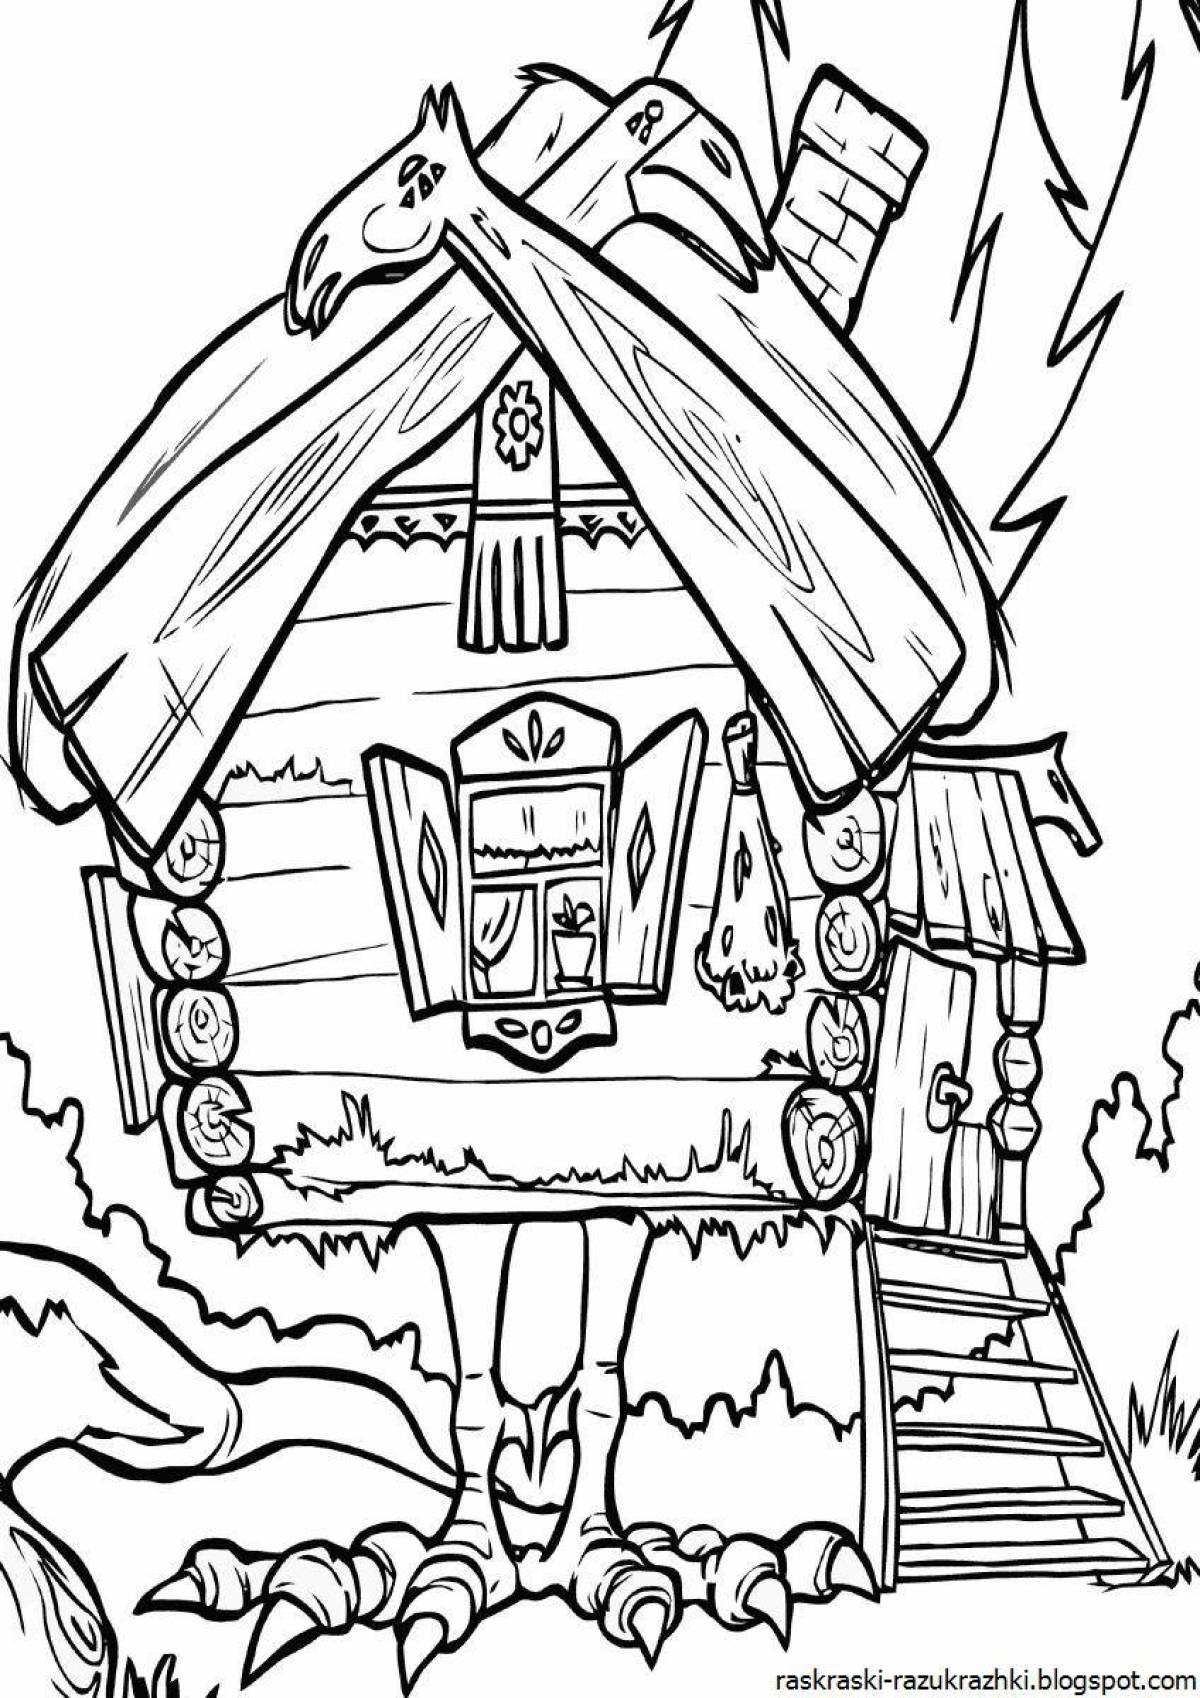 Coloring page nice hut